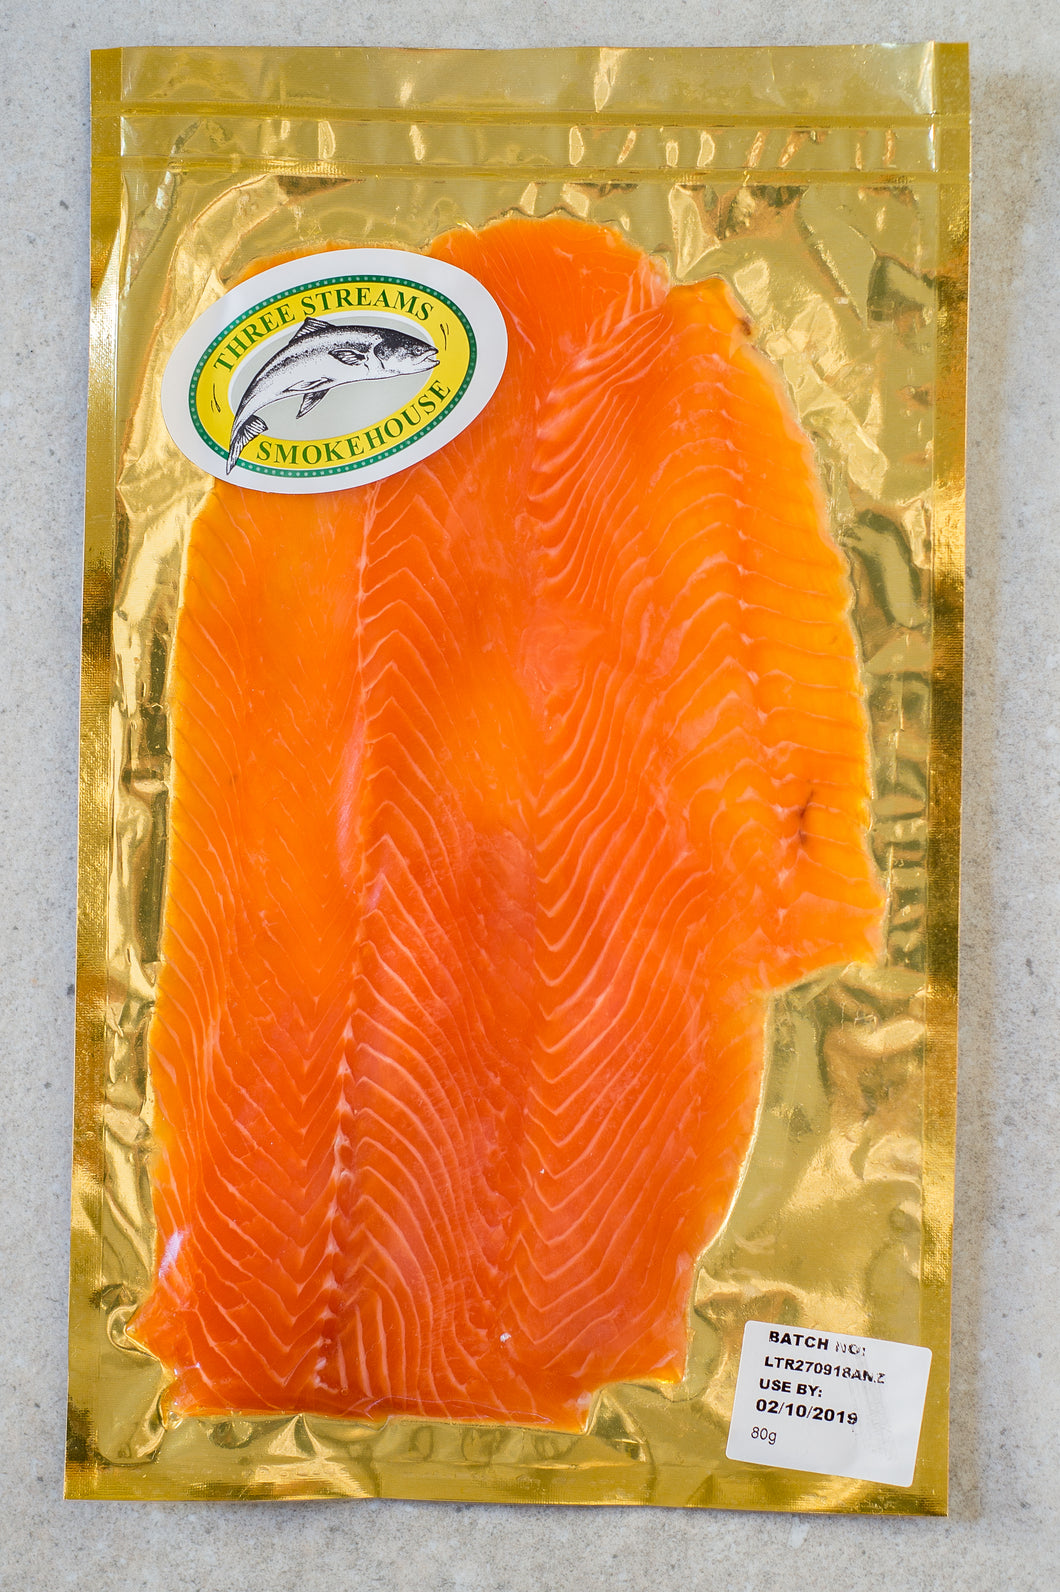 Three Streams Cold Smoked Trout Ribbons Cater Grade 80g (DELIVERY IN CAPE TOWN METROPOLITAN ONLY)